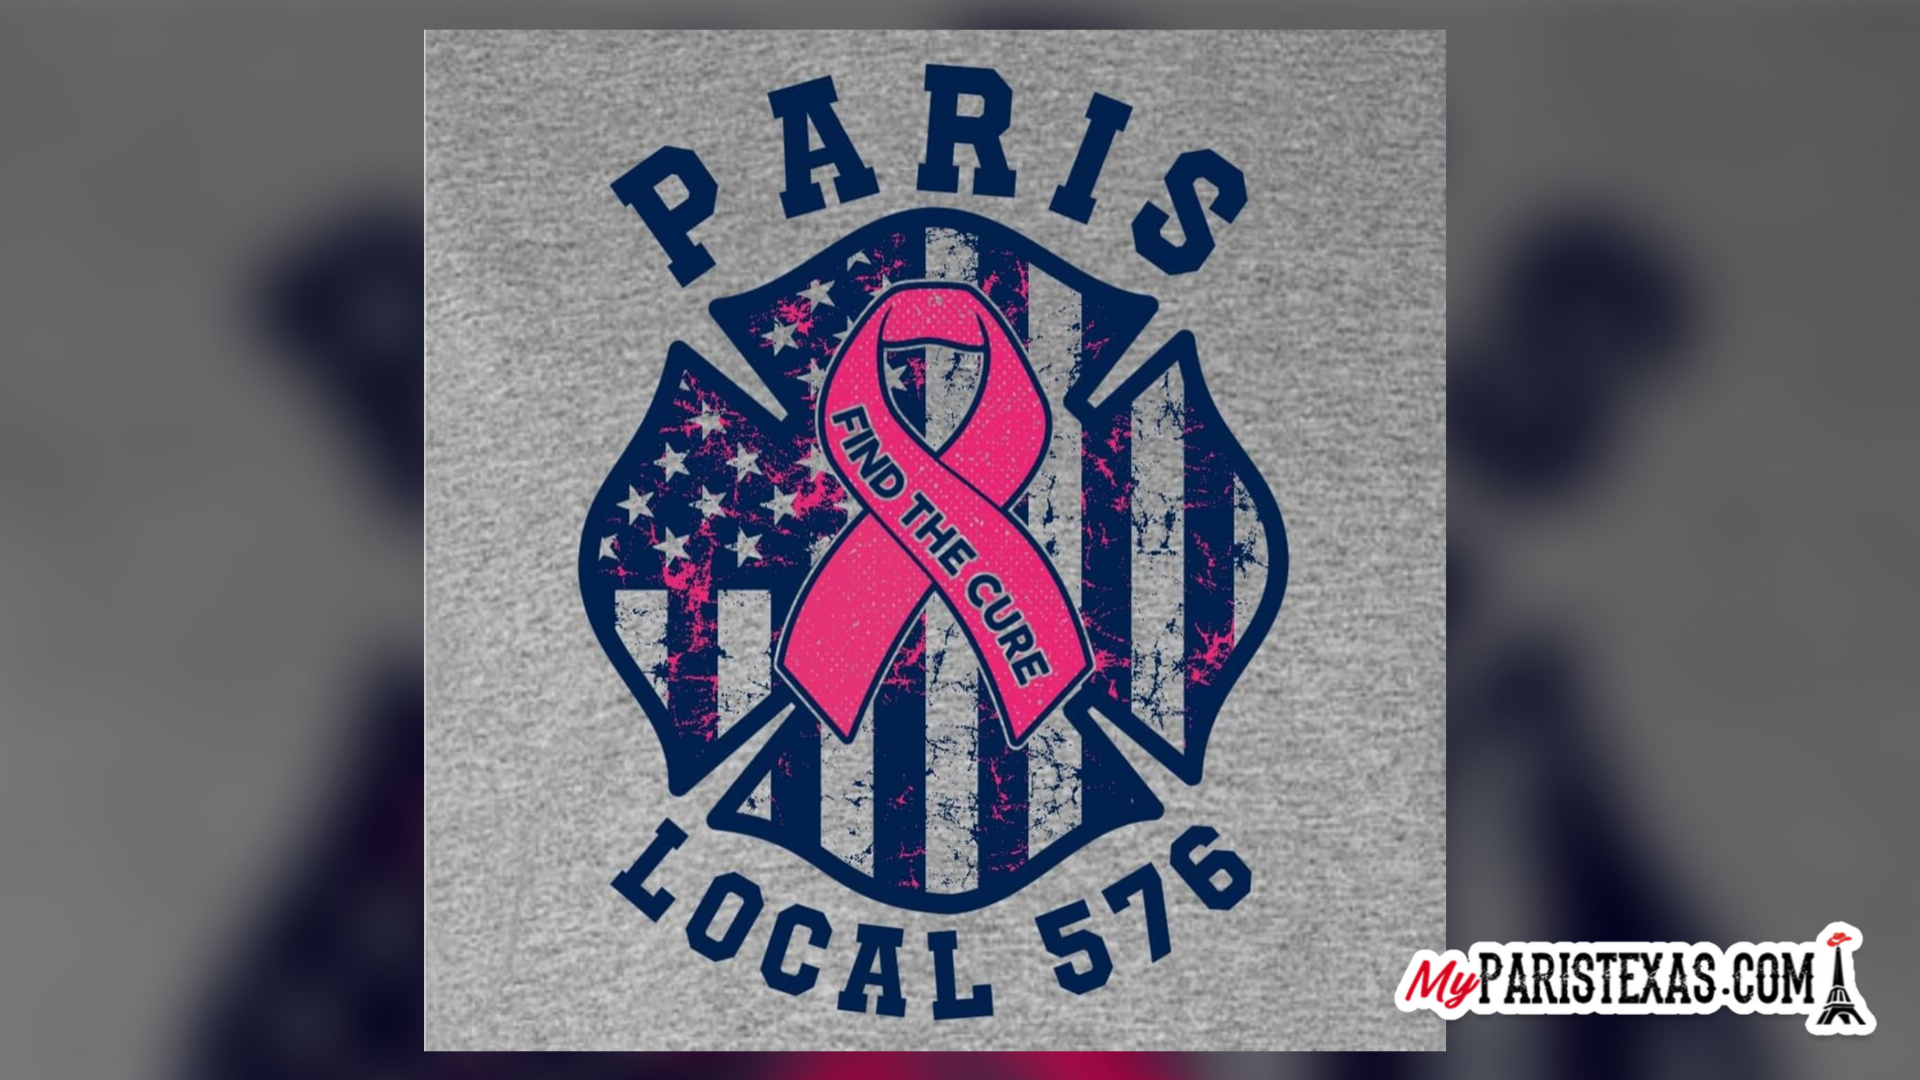 Fire Department Breast Cancer Shirts